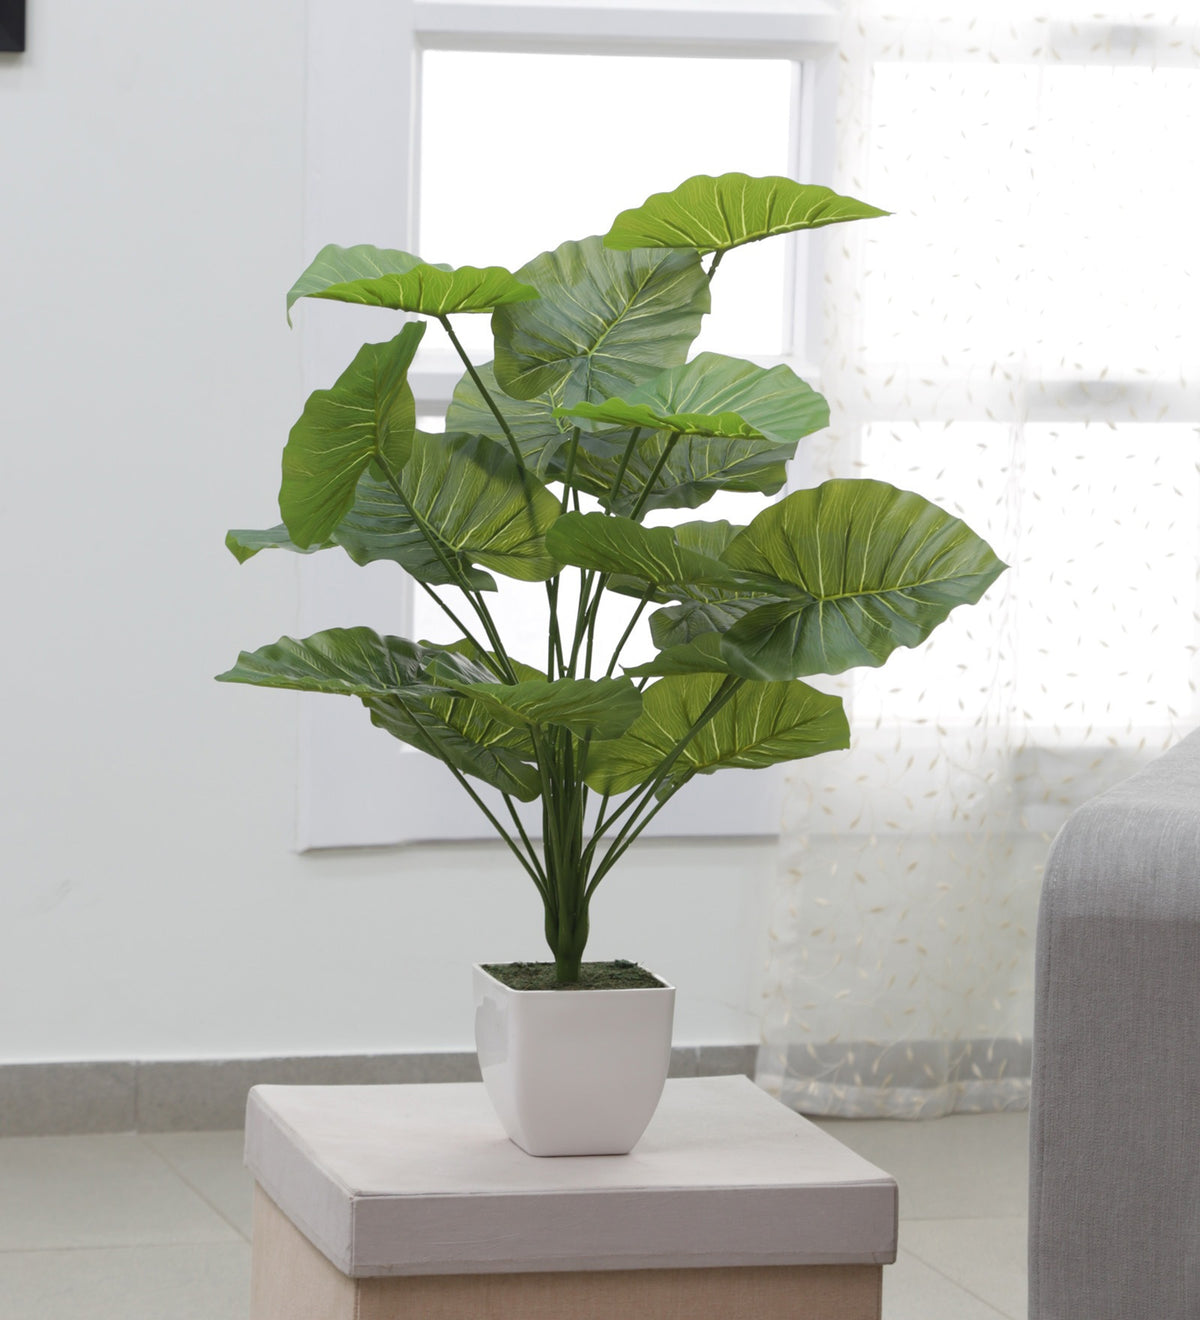 Artificial Rubber Plant for Home, Office Decor Ornamental Plant for Interior Decor/Home Decor/Office Décor (18 Medium Size Leaves Plant, 75 cm Tall)